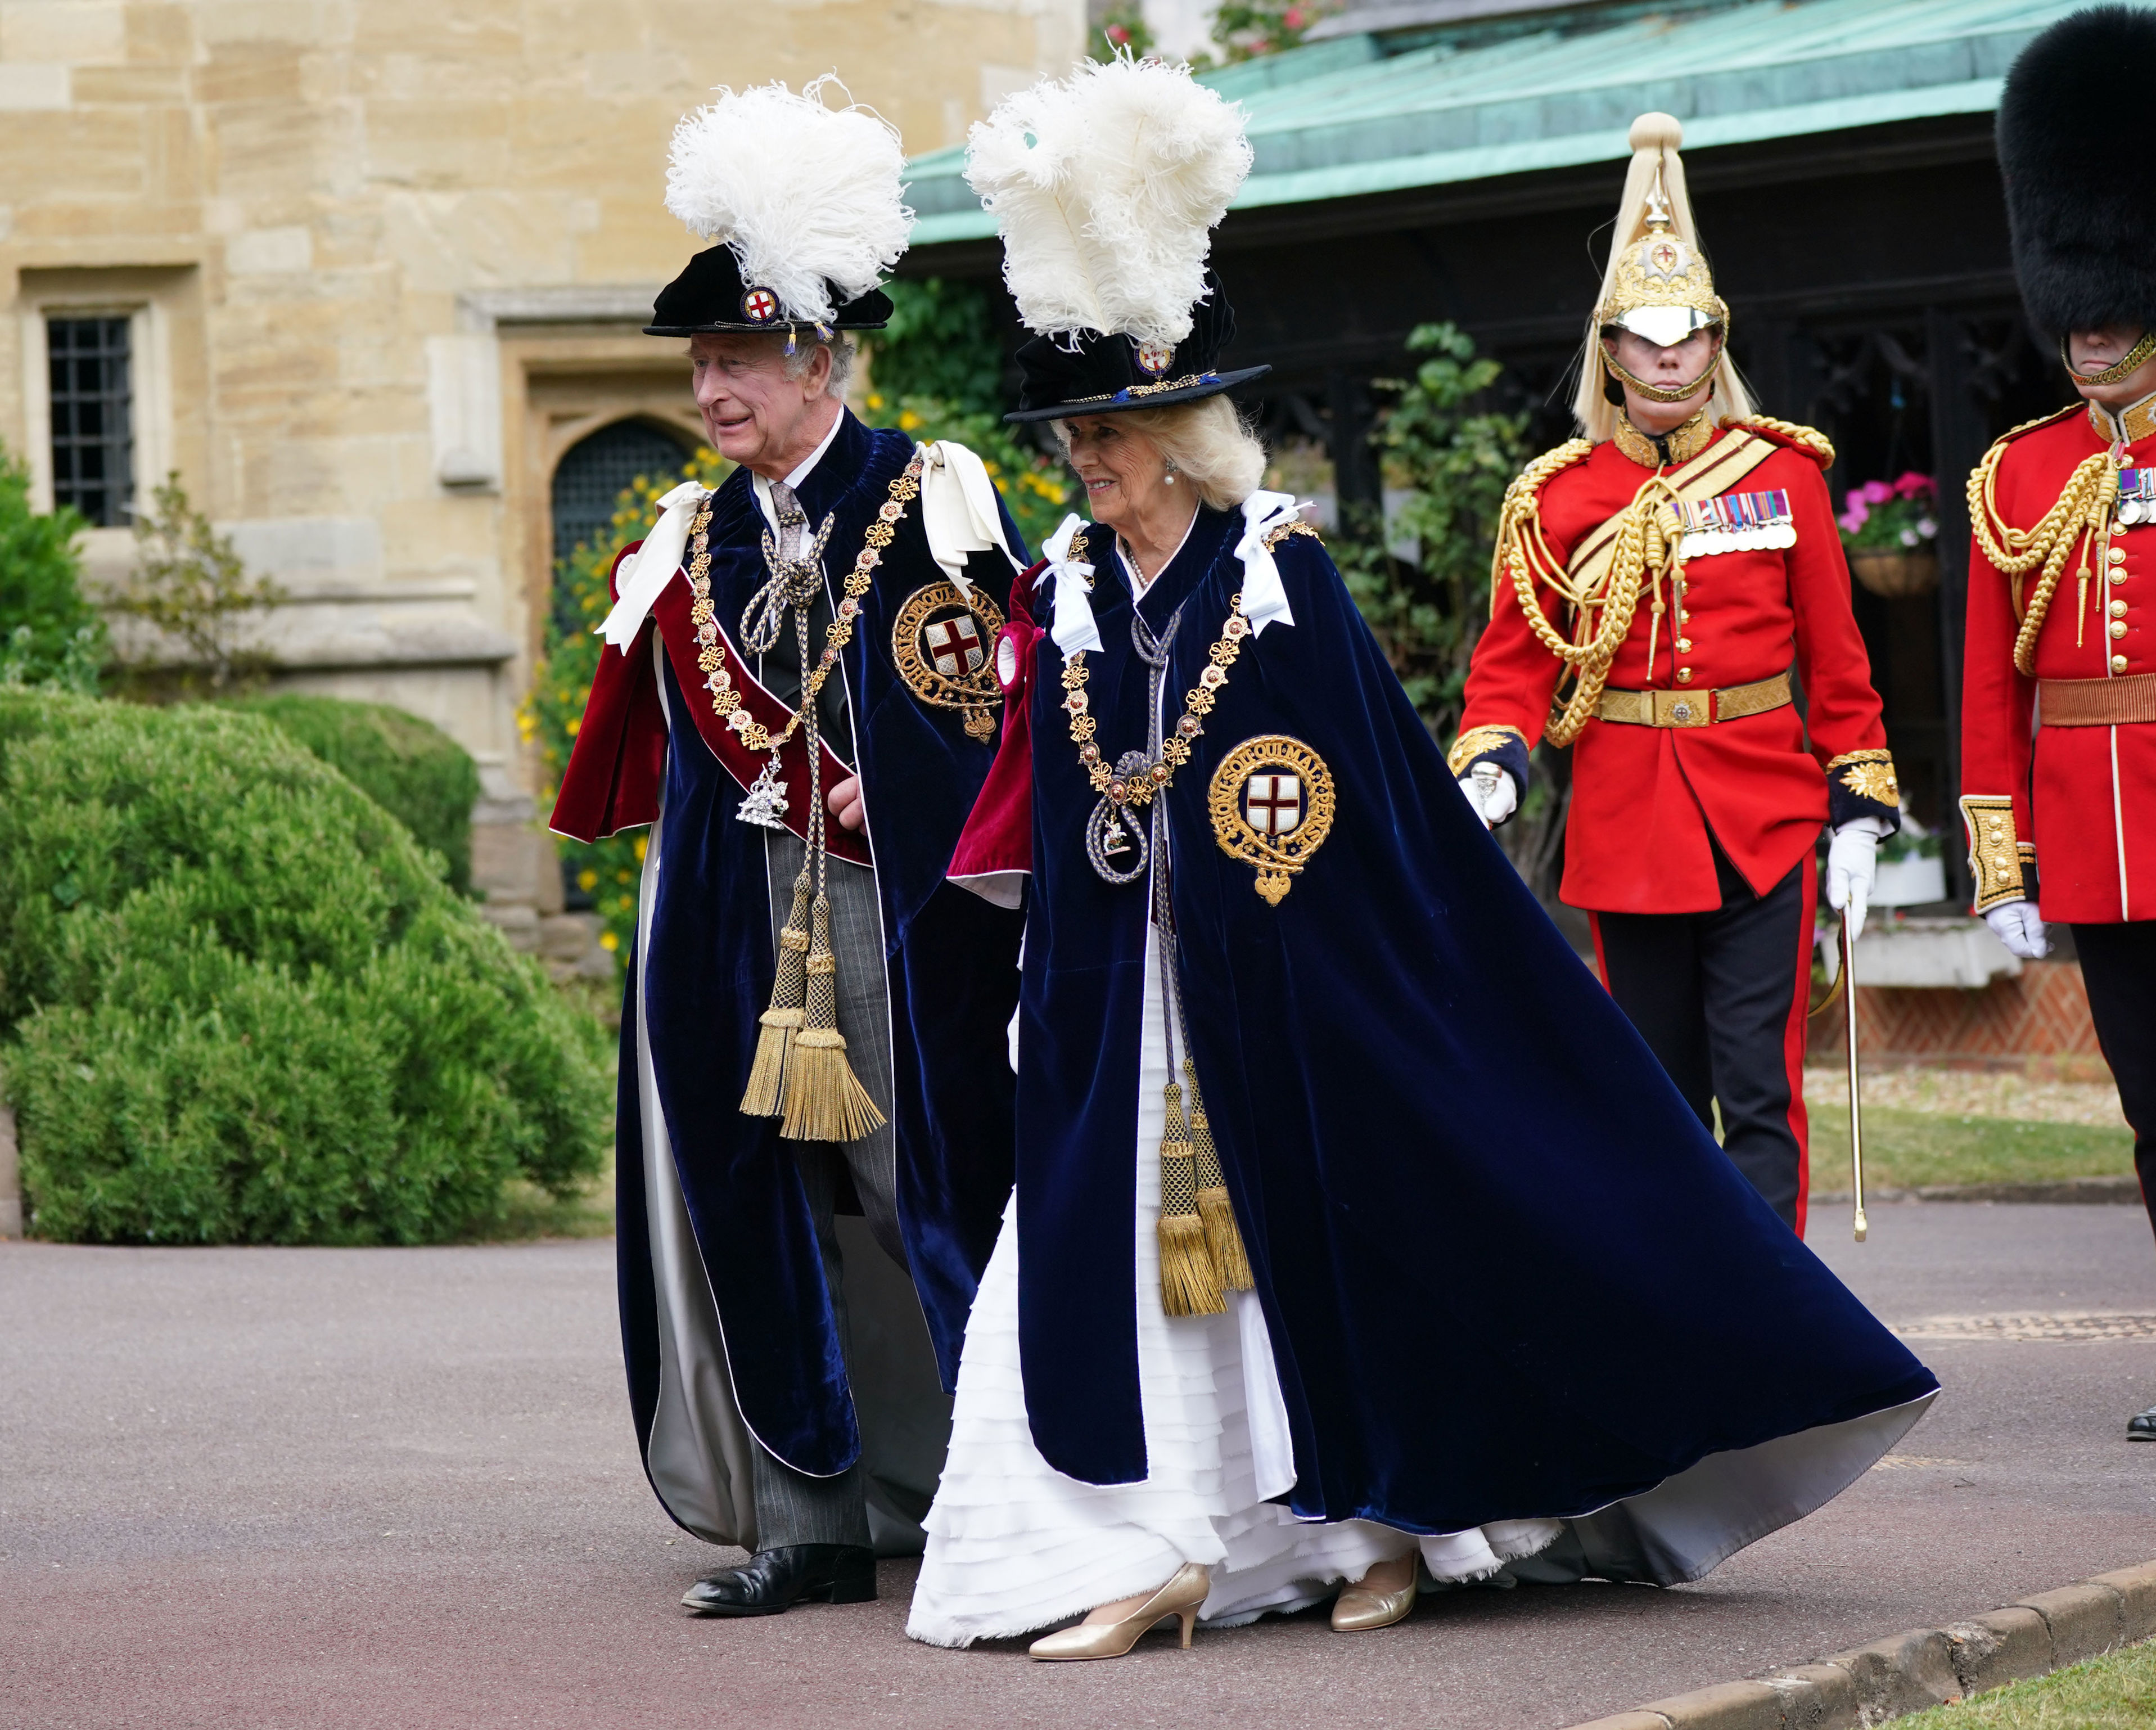 <p>King Charles III and Queen Camilla attend the annual Order of the Garter Service at St. George's Chapel at Windsor Castle in Windsor, England, on June 19, 2023. The Order of the Garter is the oldest and most senior order of chivalry in Britain. Knights of the Garter are chosen personally by the sovereign to honor those who have held public office, contributed in a particular way to national life or who have served the sovereign personally.</p>